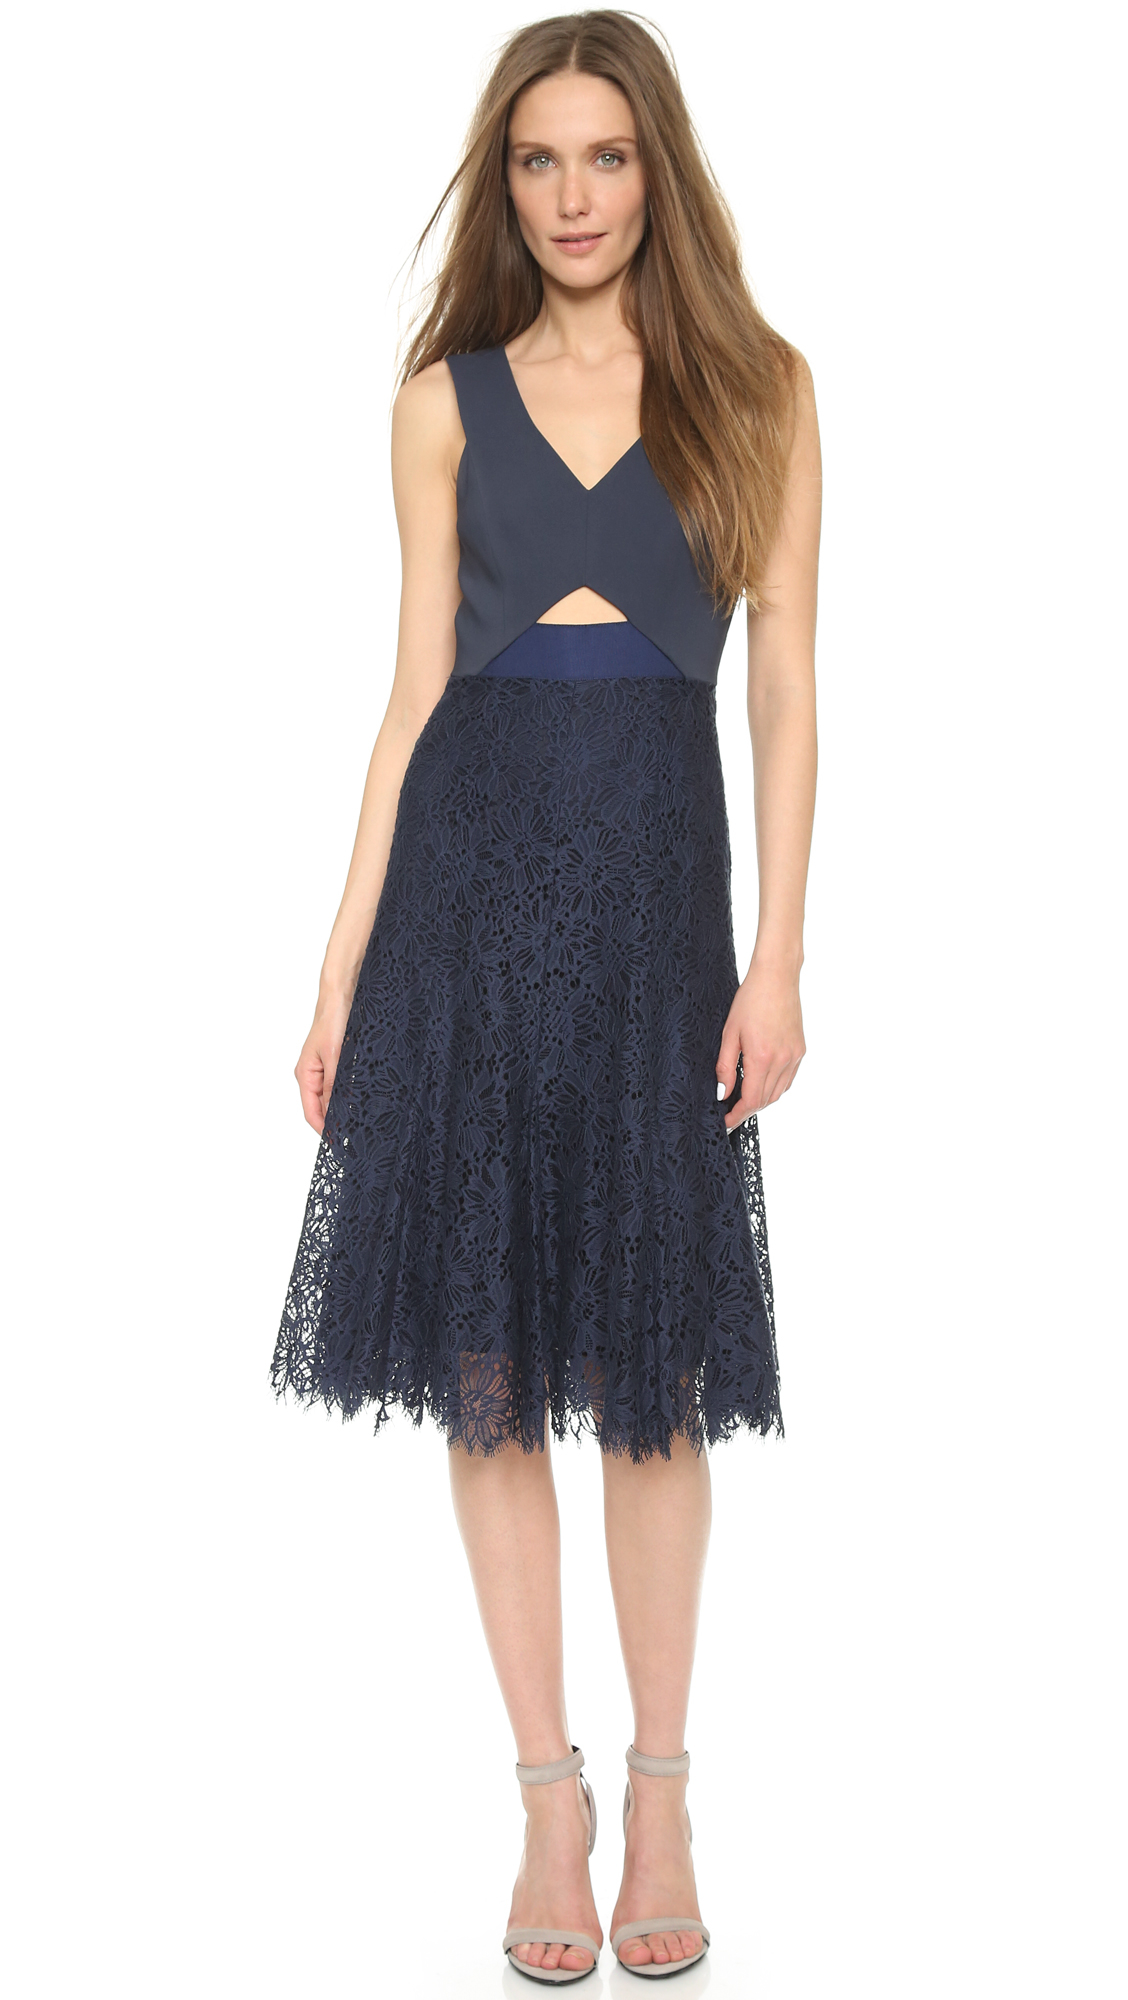 Lyst - Rebecca Taylor Lace Cutout Dress - Navy in Blue